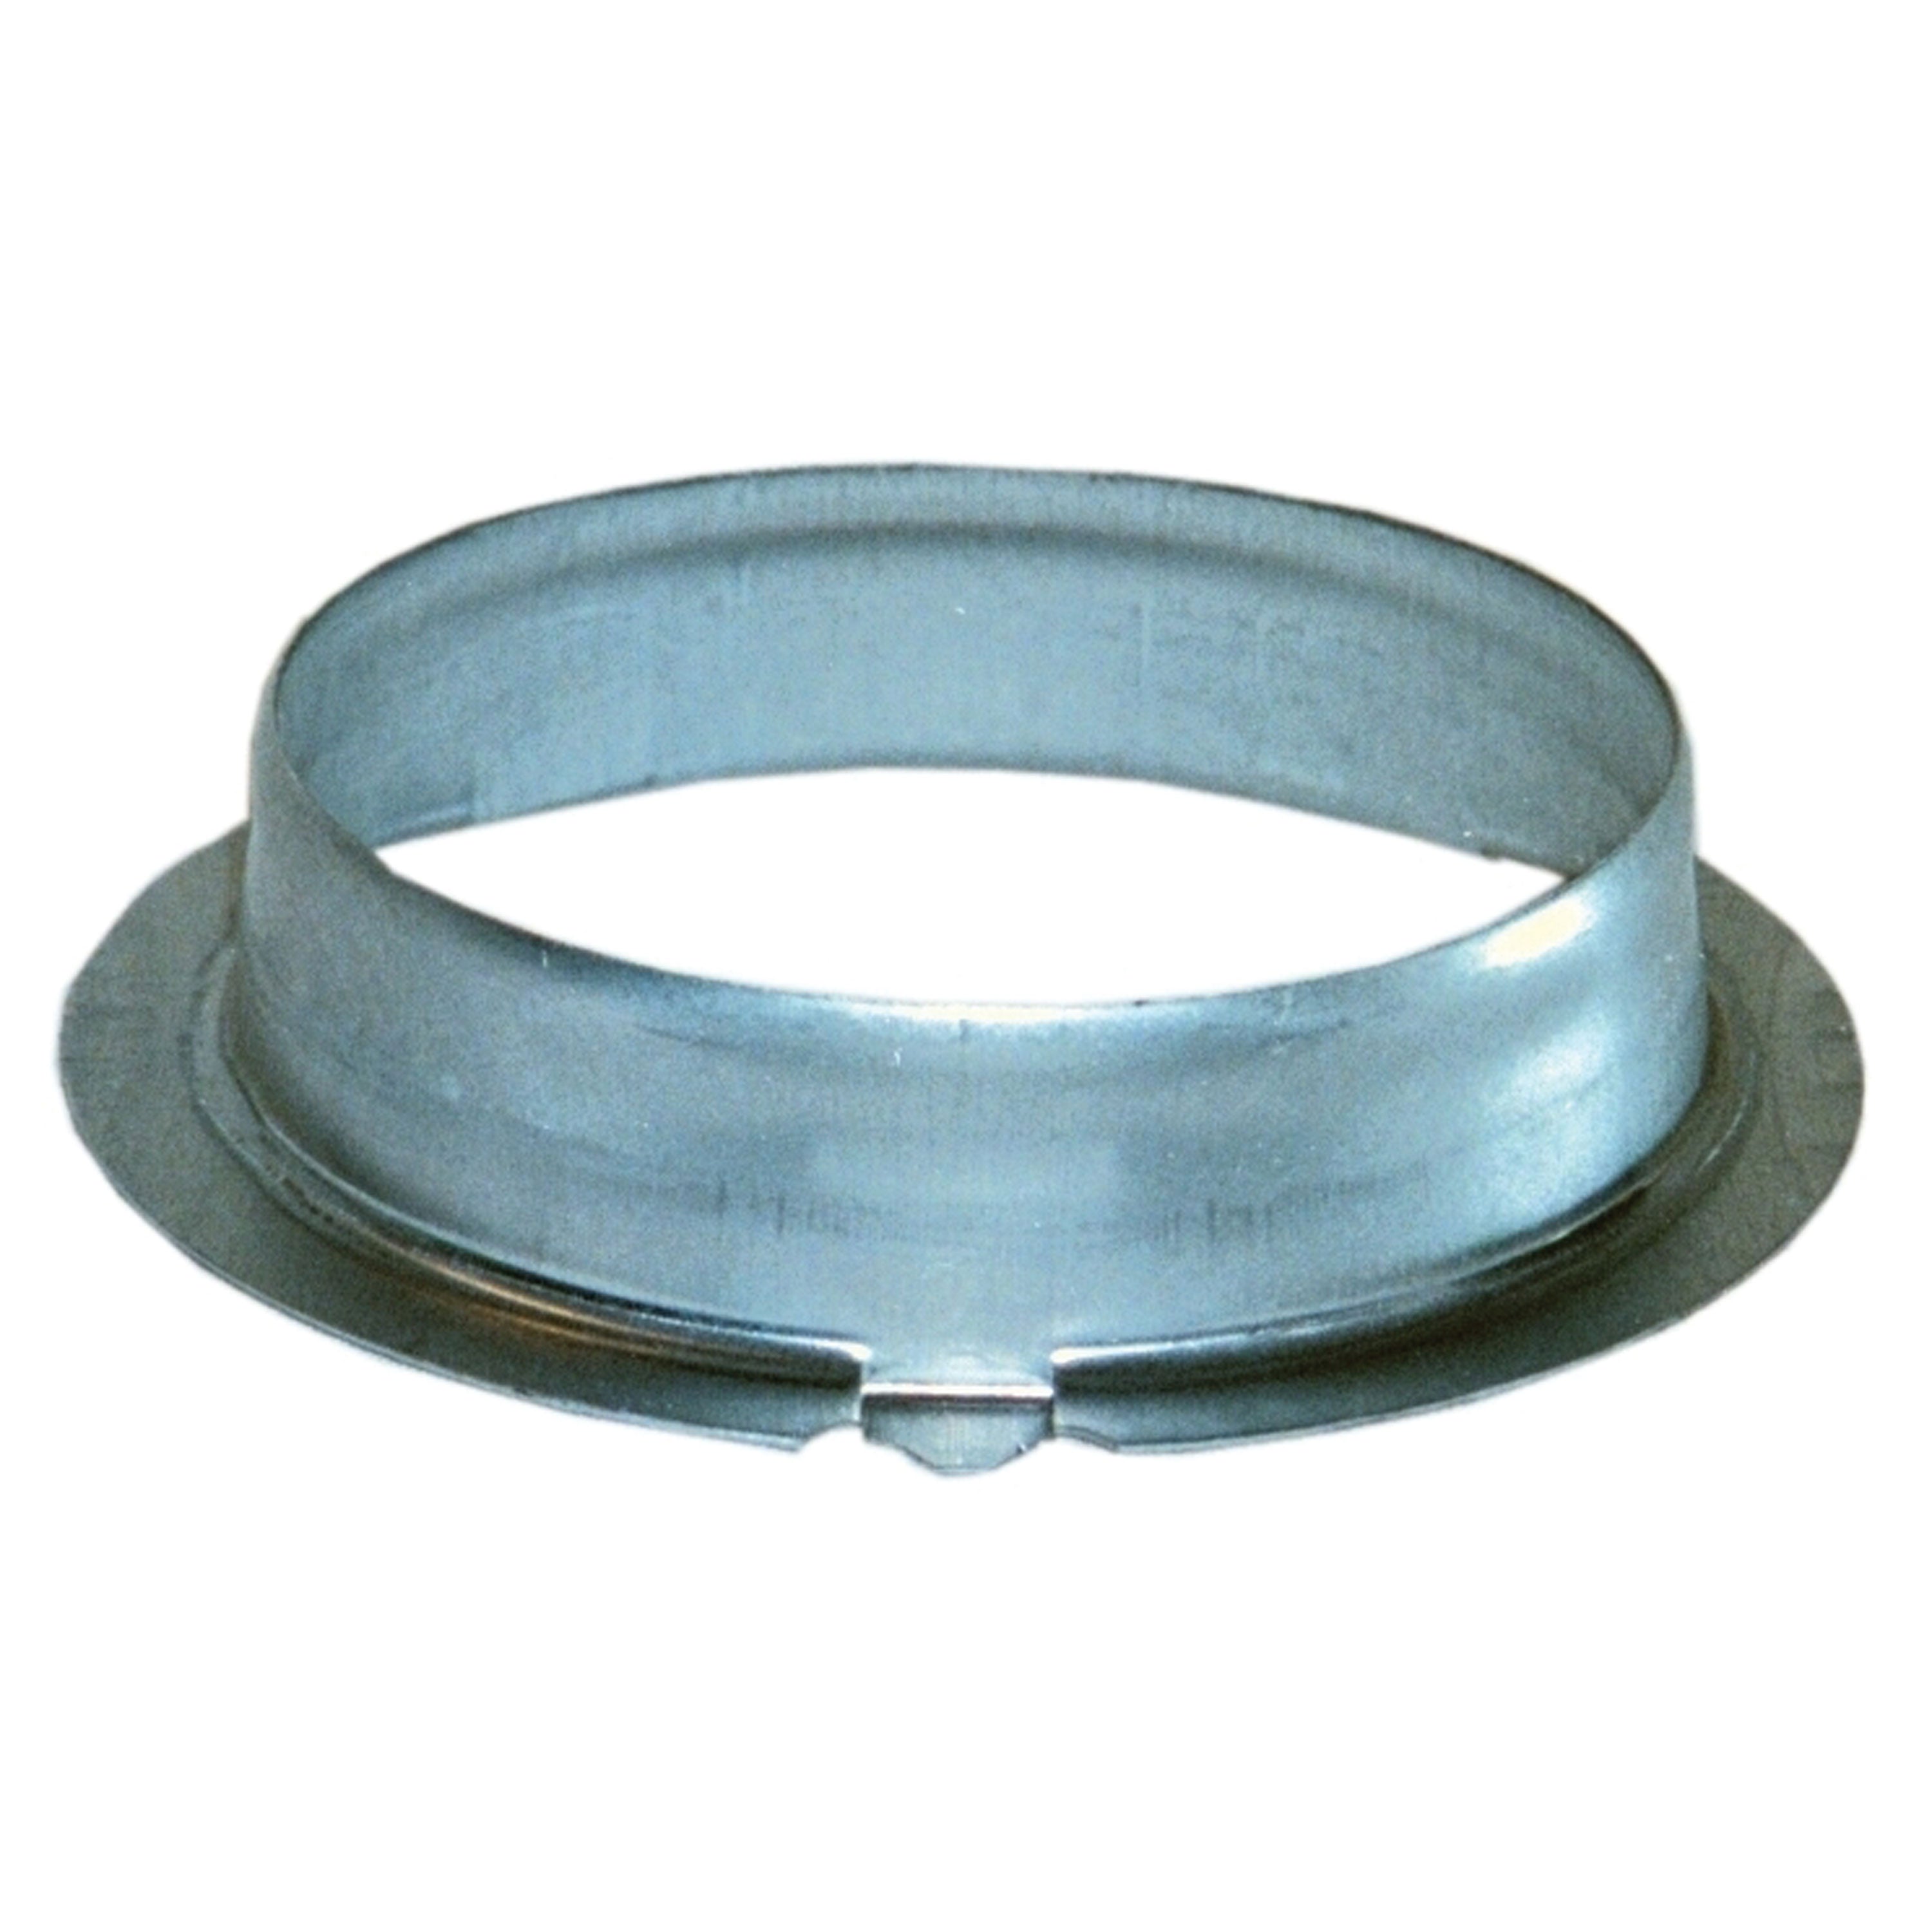 Suburban 051240 Furnace Duct Collar for P40 Models